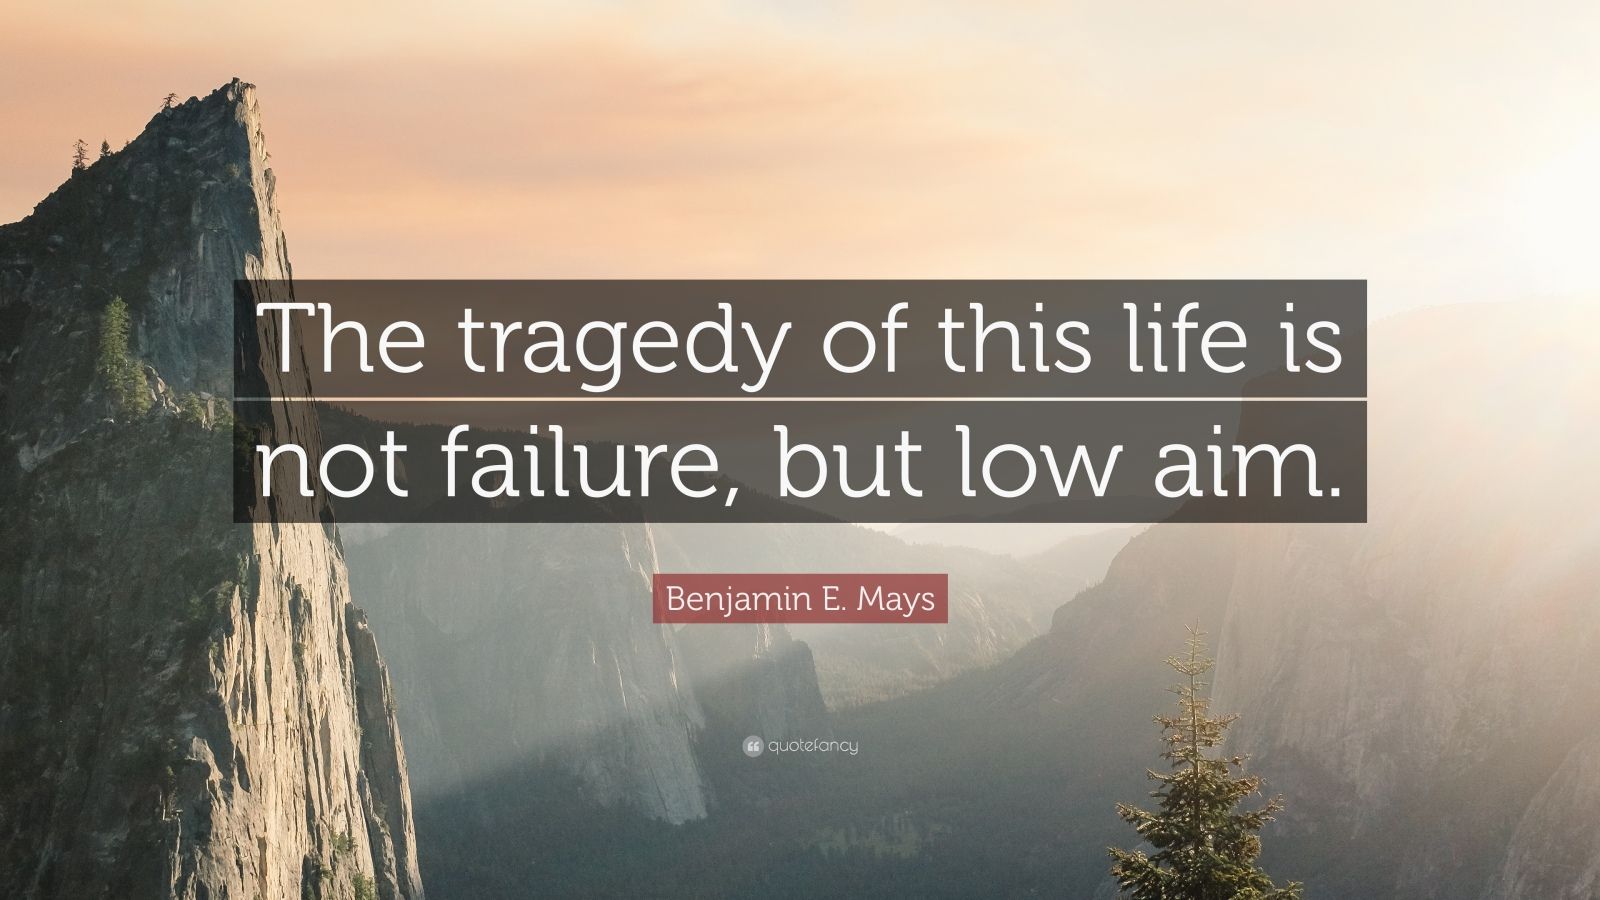  Benjamin Mays Quotes of all time Learn more here 